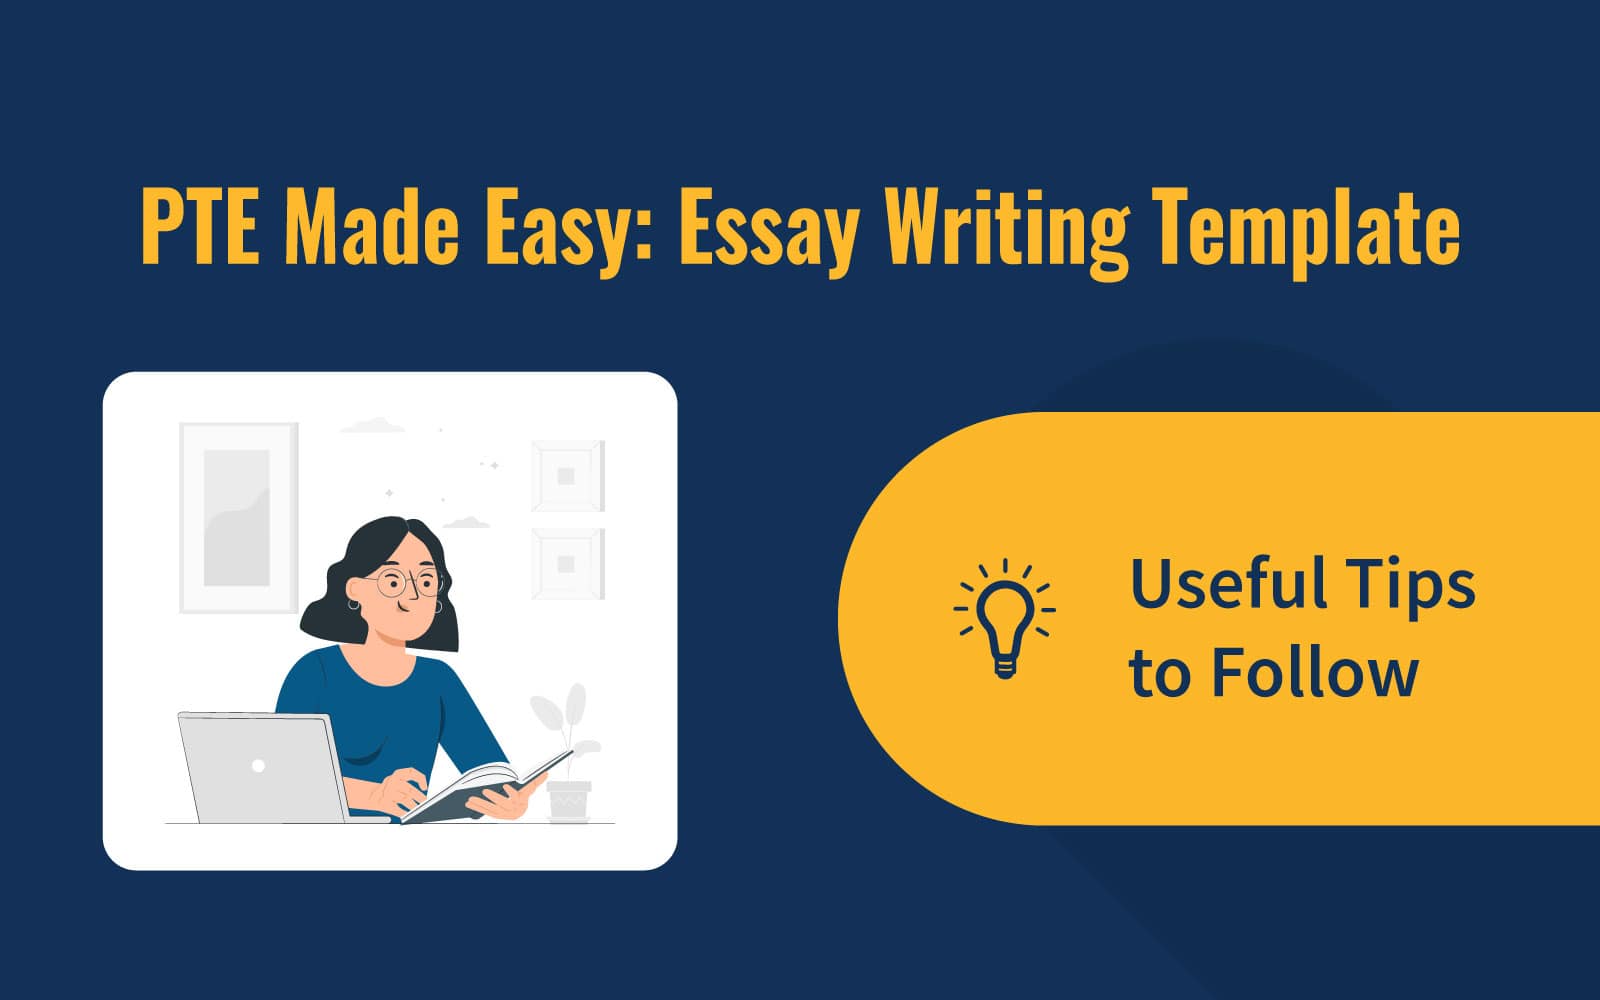 pte essay writing easy template